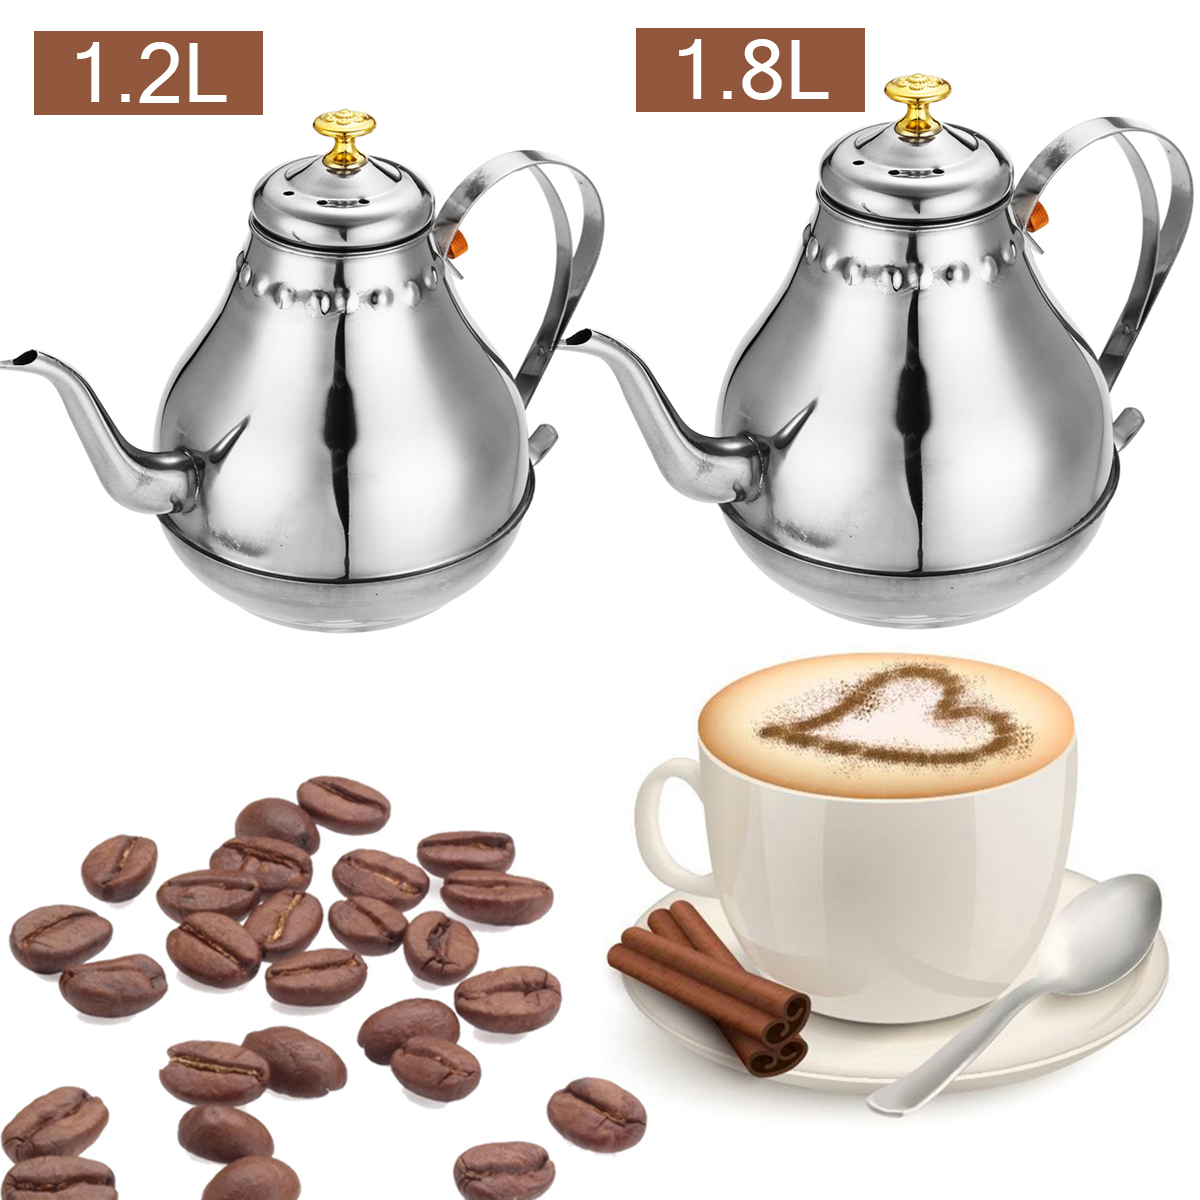 1218L-Stainless-Steel-Coffee-Drip-Kettle-Pot-for-Coffee-Tea-with-Filter-Net-1342379